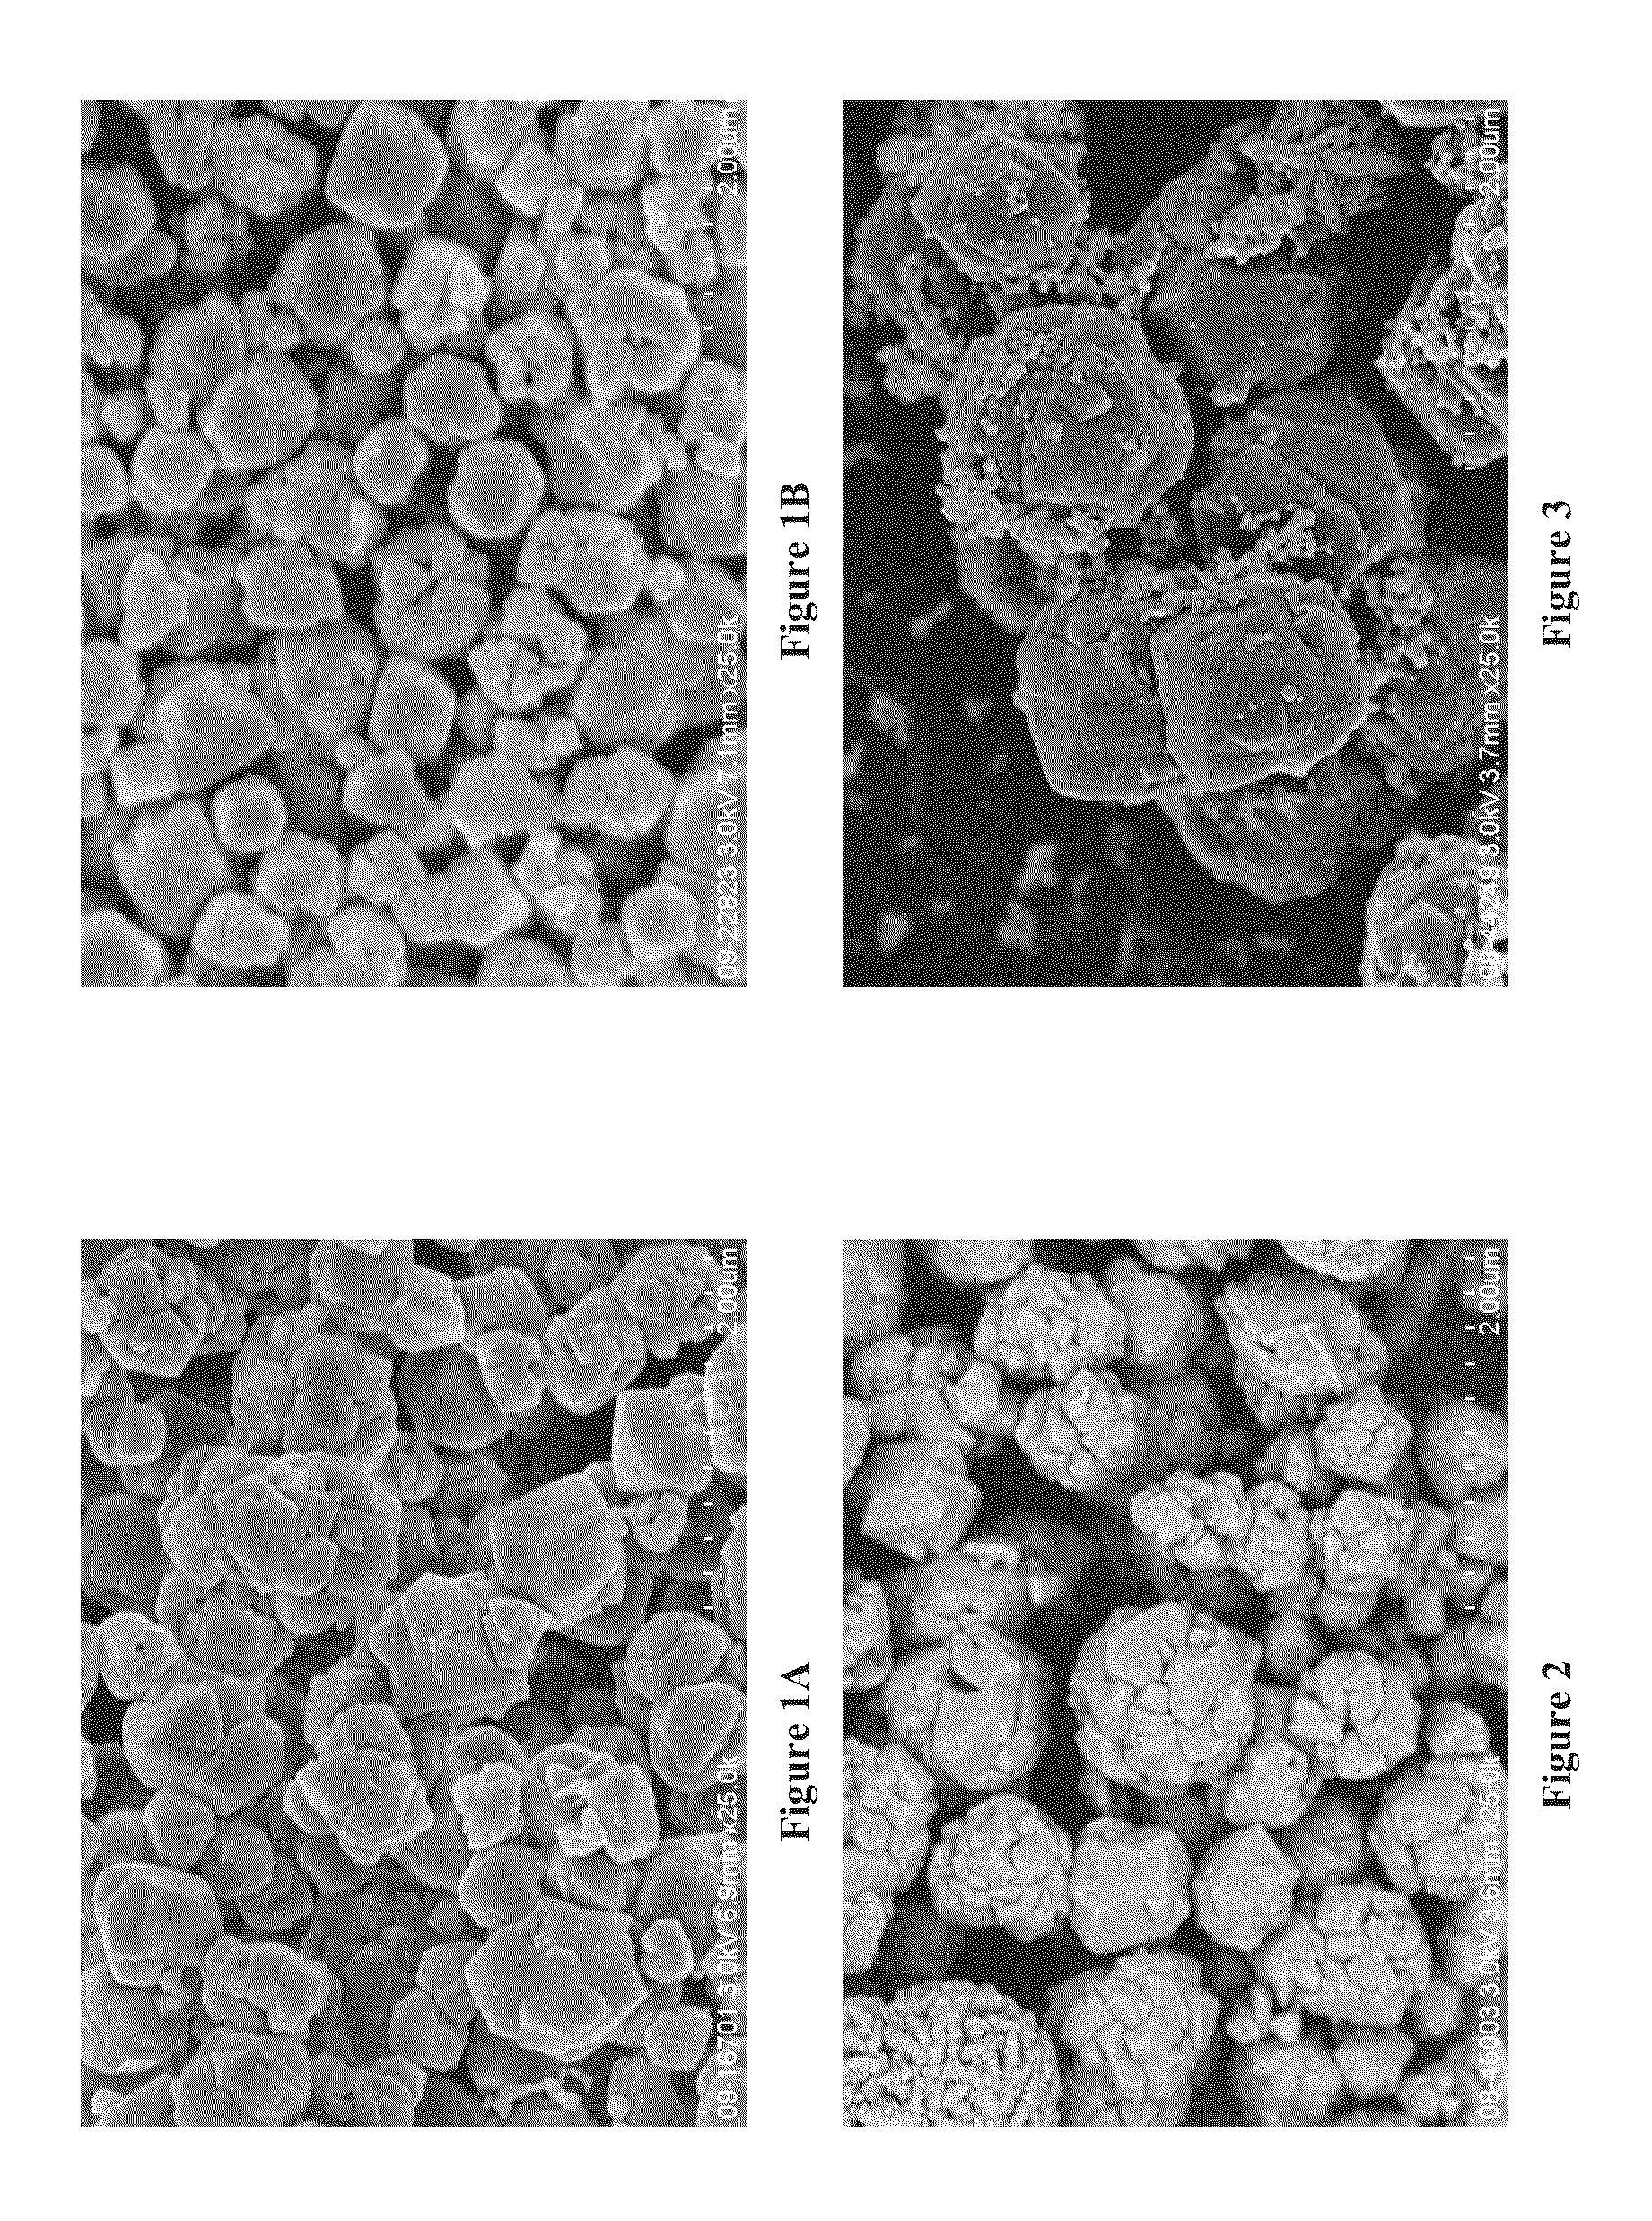 Stabilized aggregates of small crystallites of zeolite y